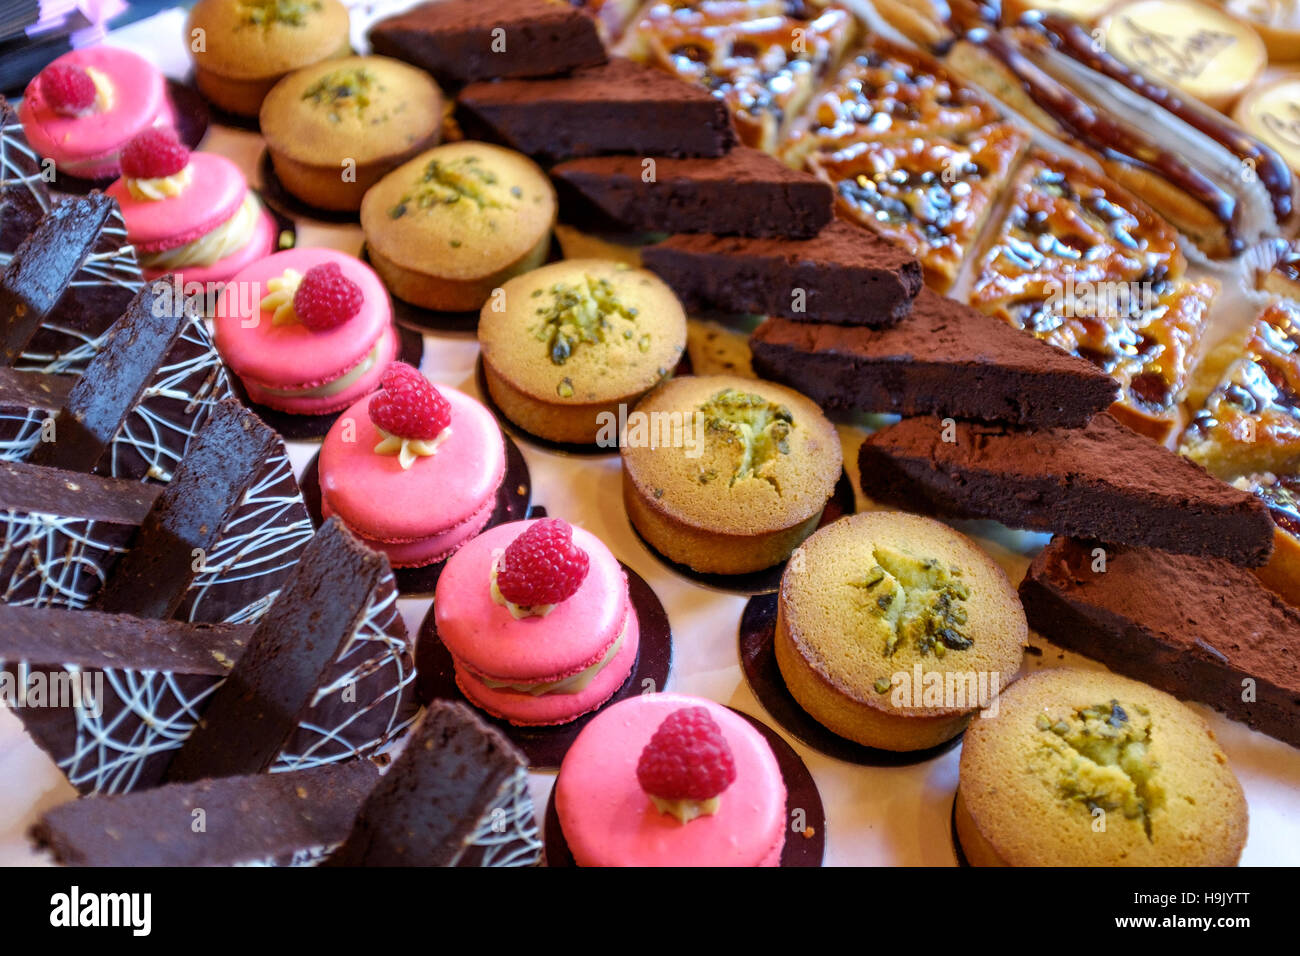 Deserts selection-cup cakes, Raspberry Macaroons, chocolate cake Stock Photo